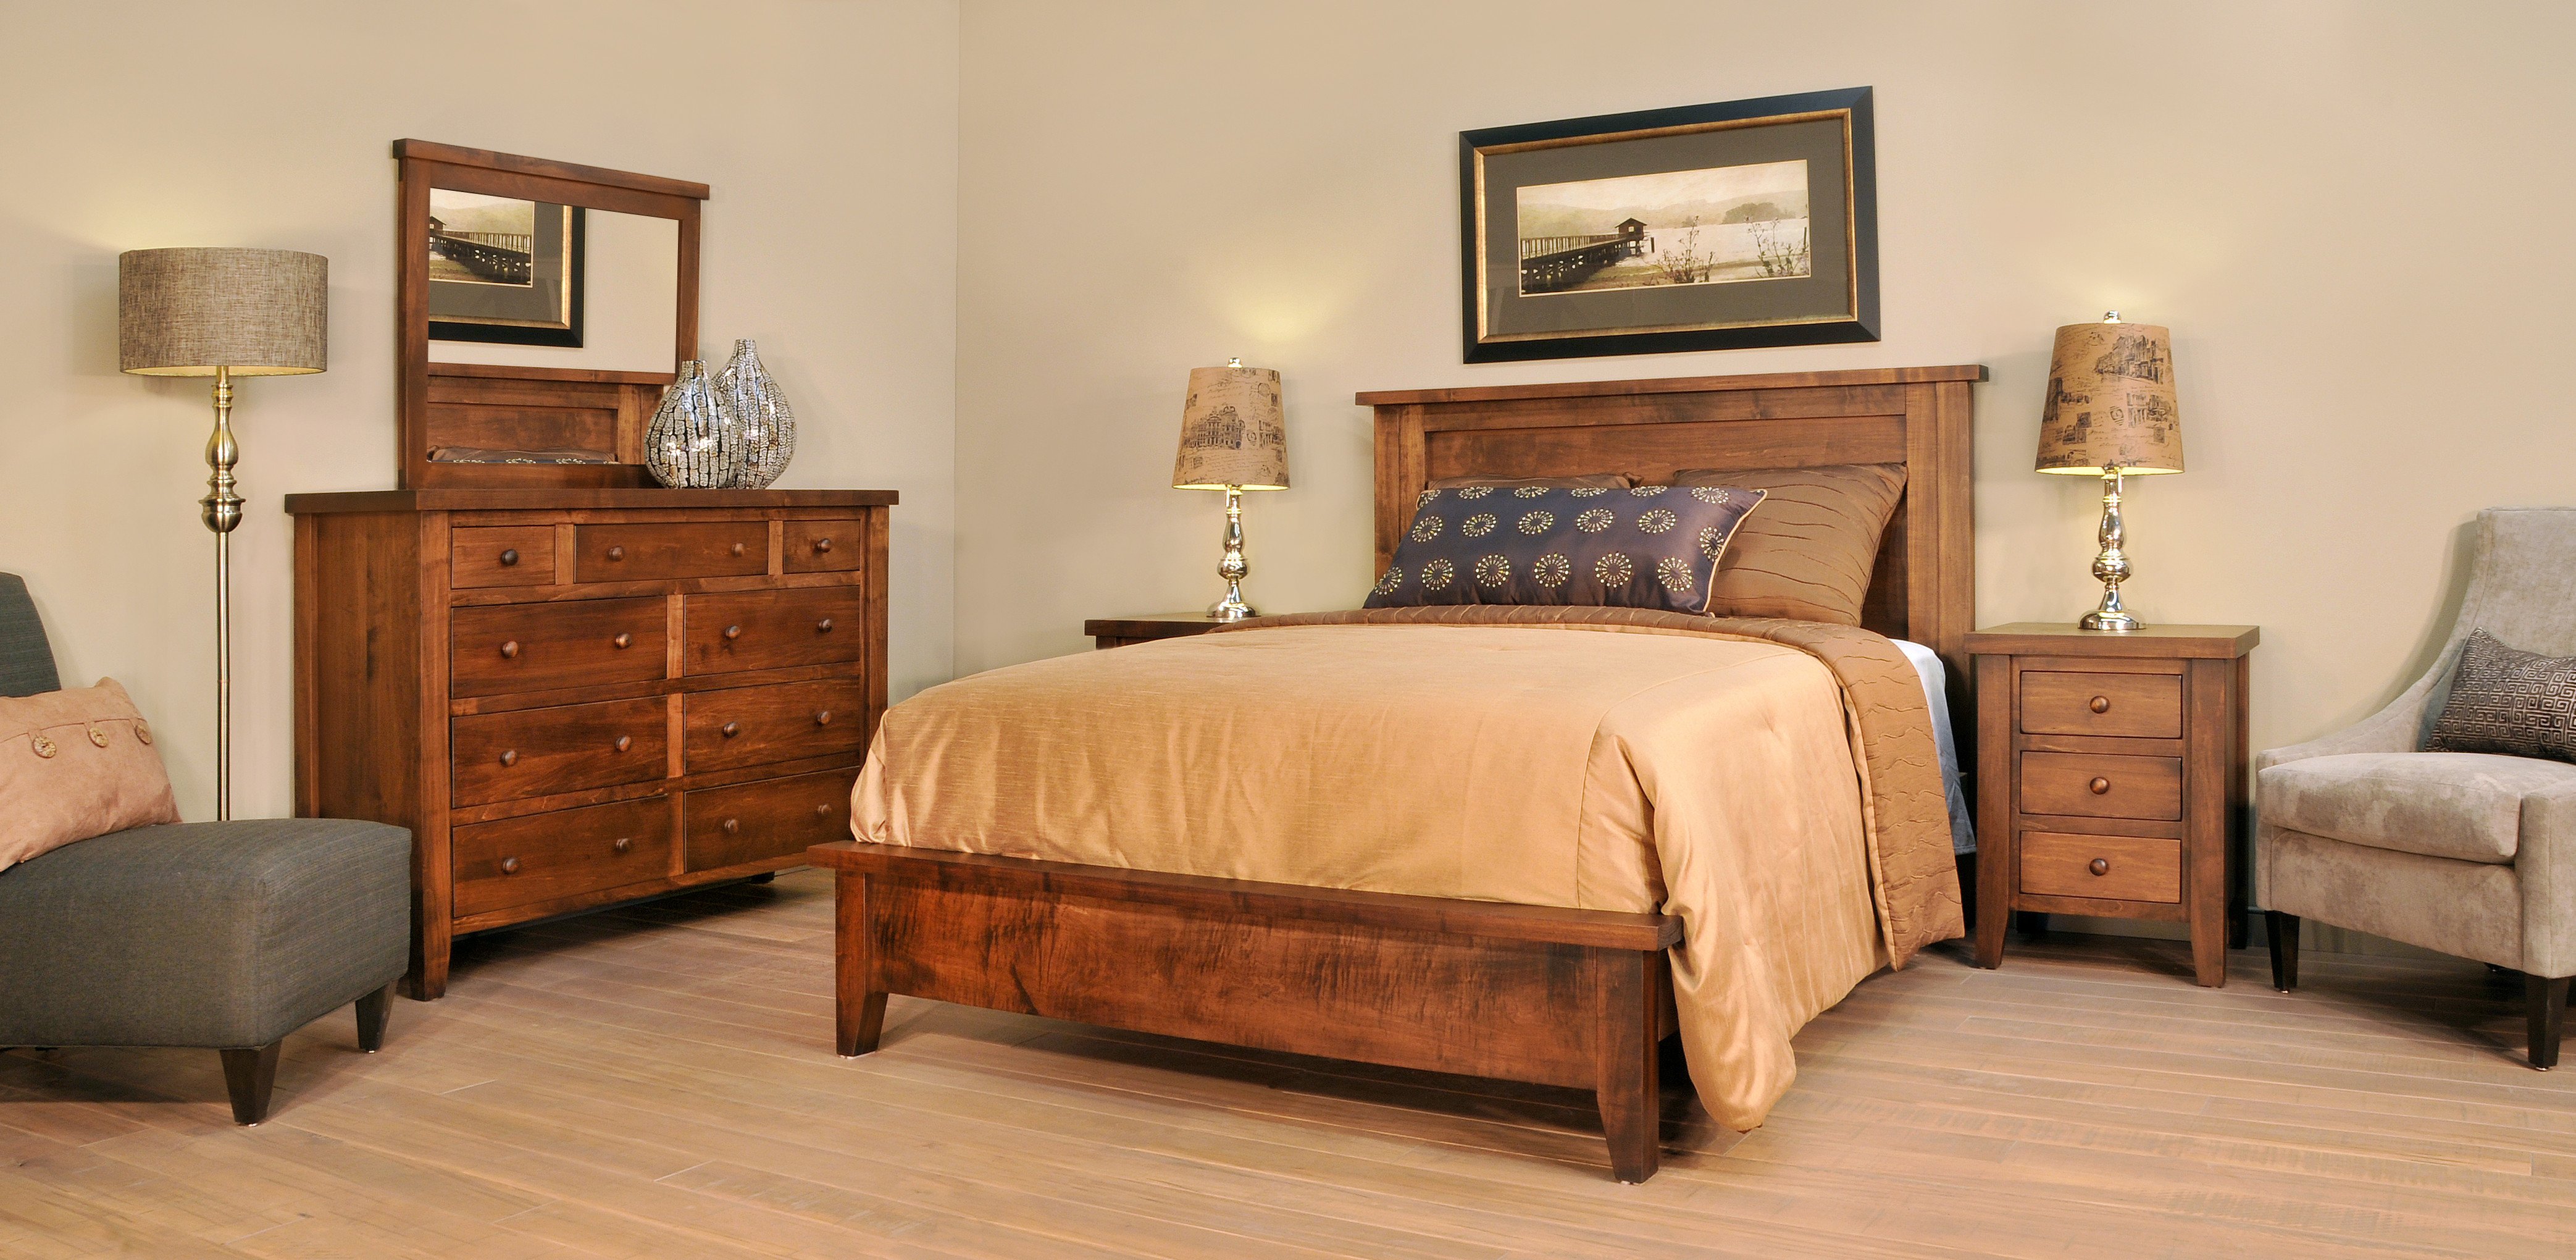 Rustic Pine Bedroom Furniture Awesome Farmhouse Bed Collection – Amish Oak Warehouse